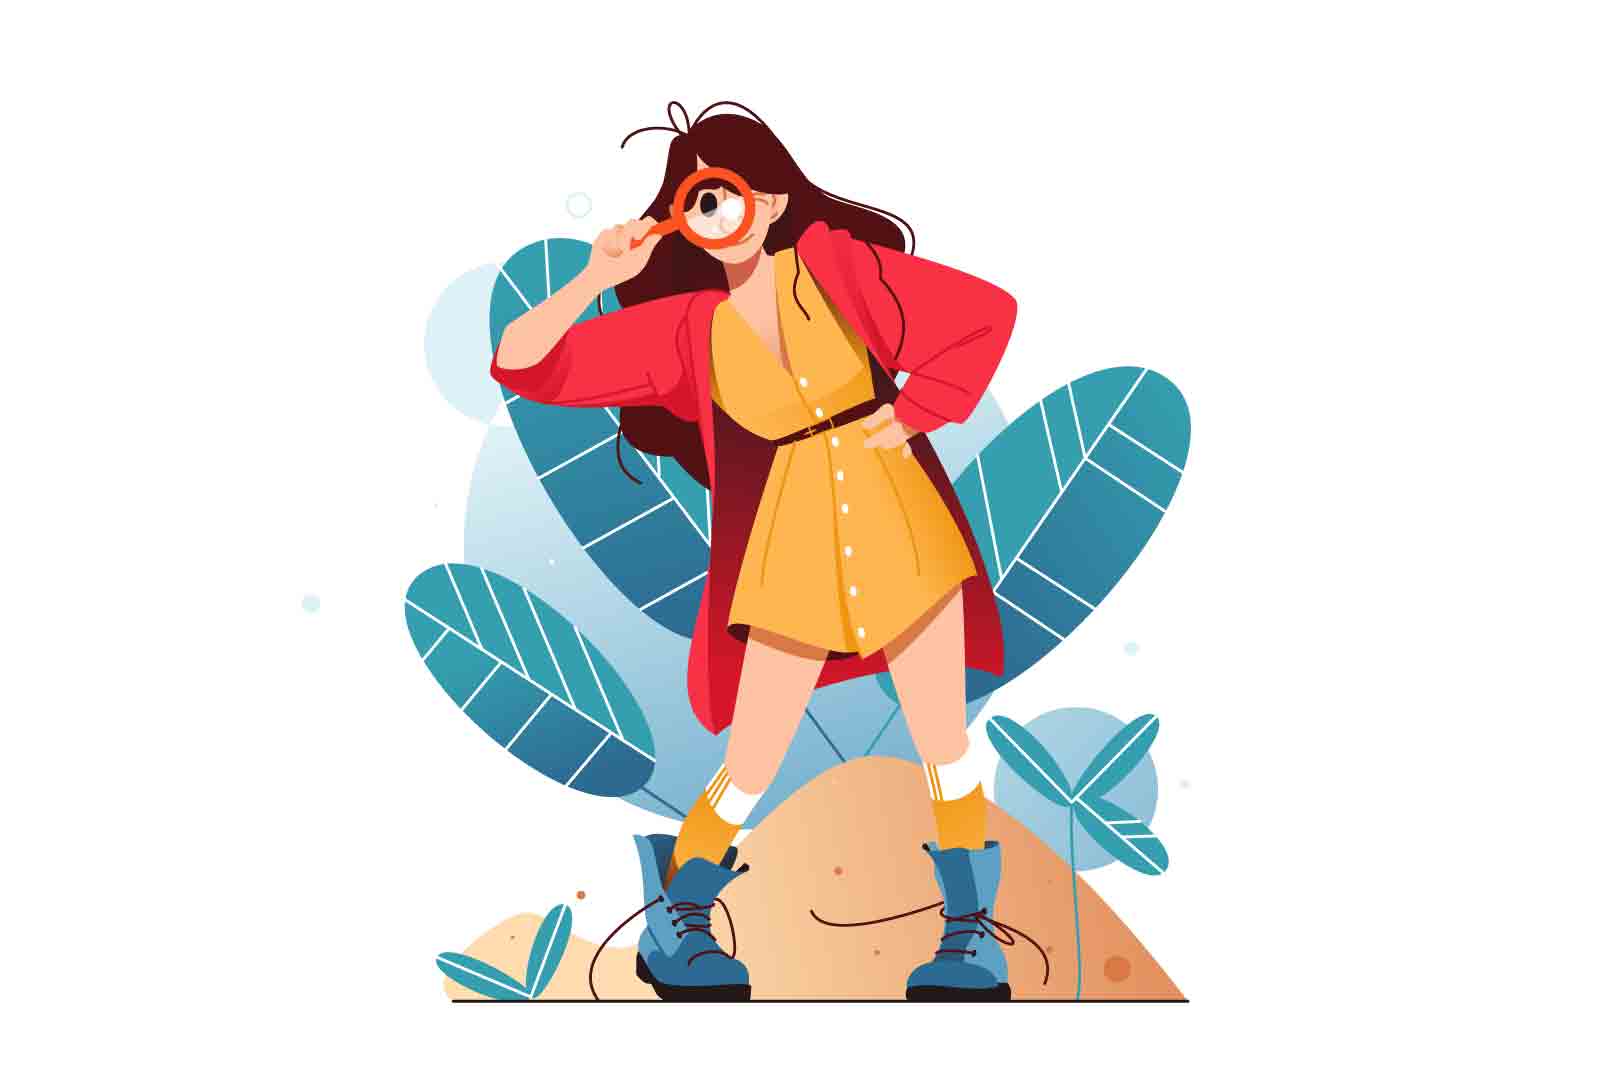 Girl exploring with magnifying glass, vector illustration. Discovery and investigation concept.